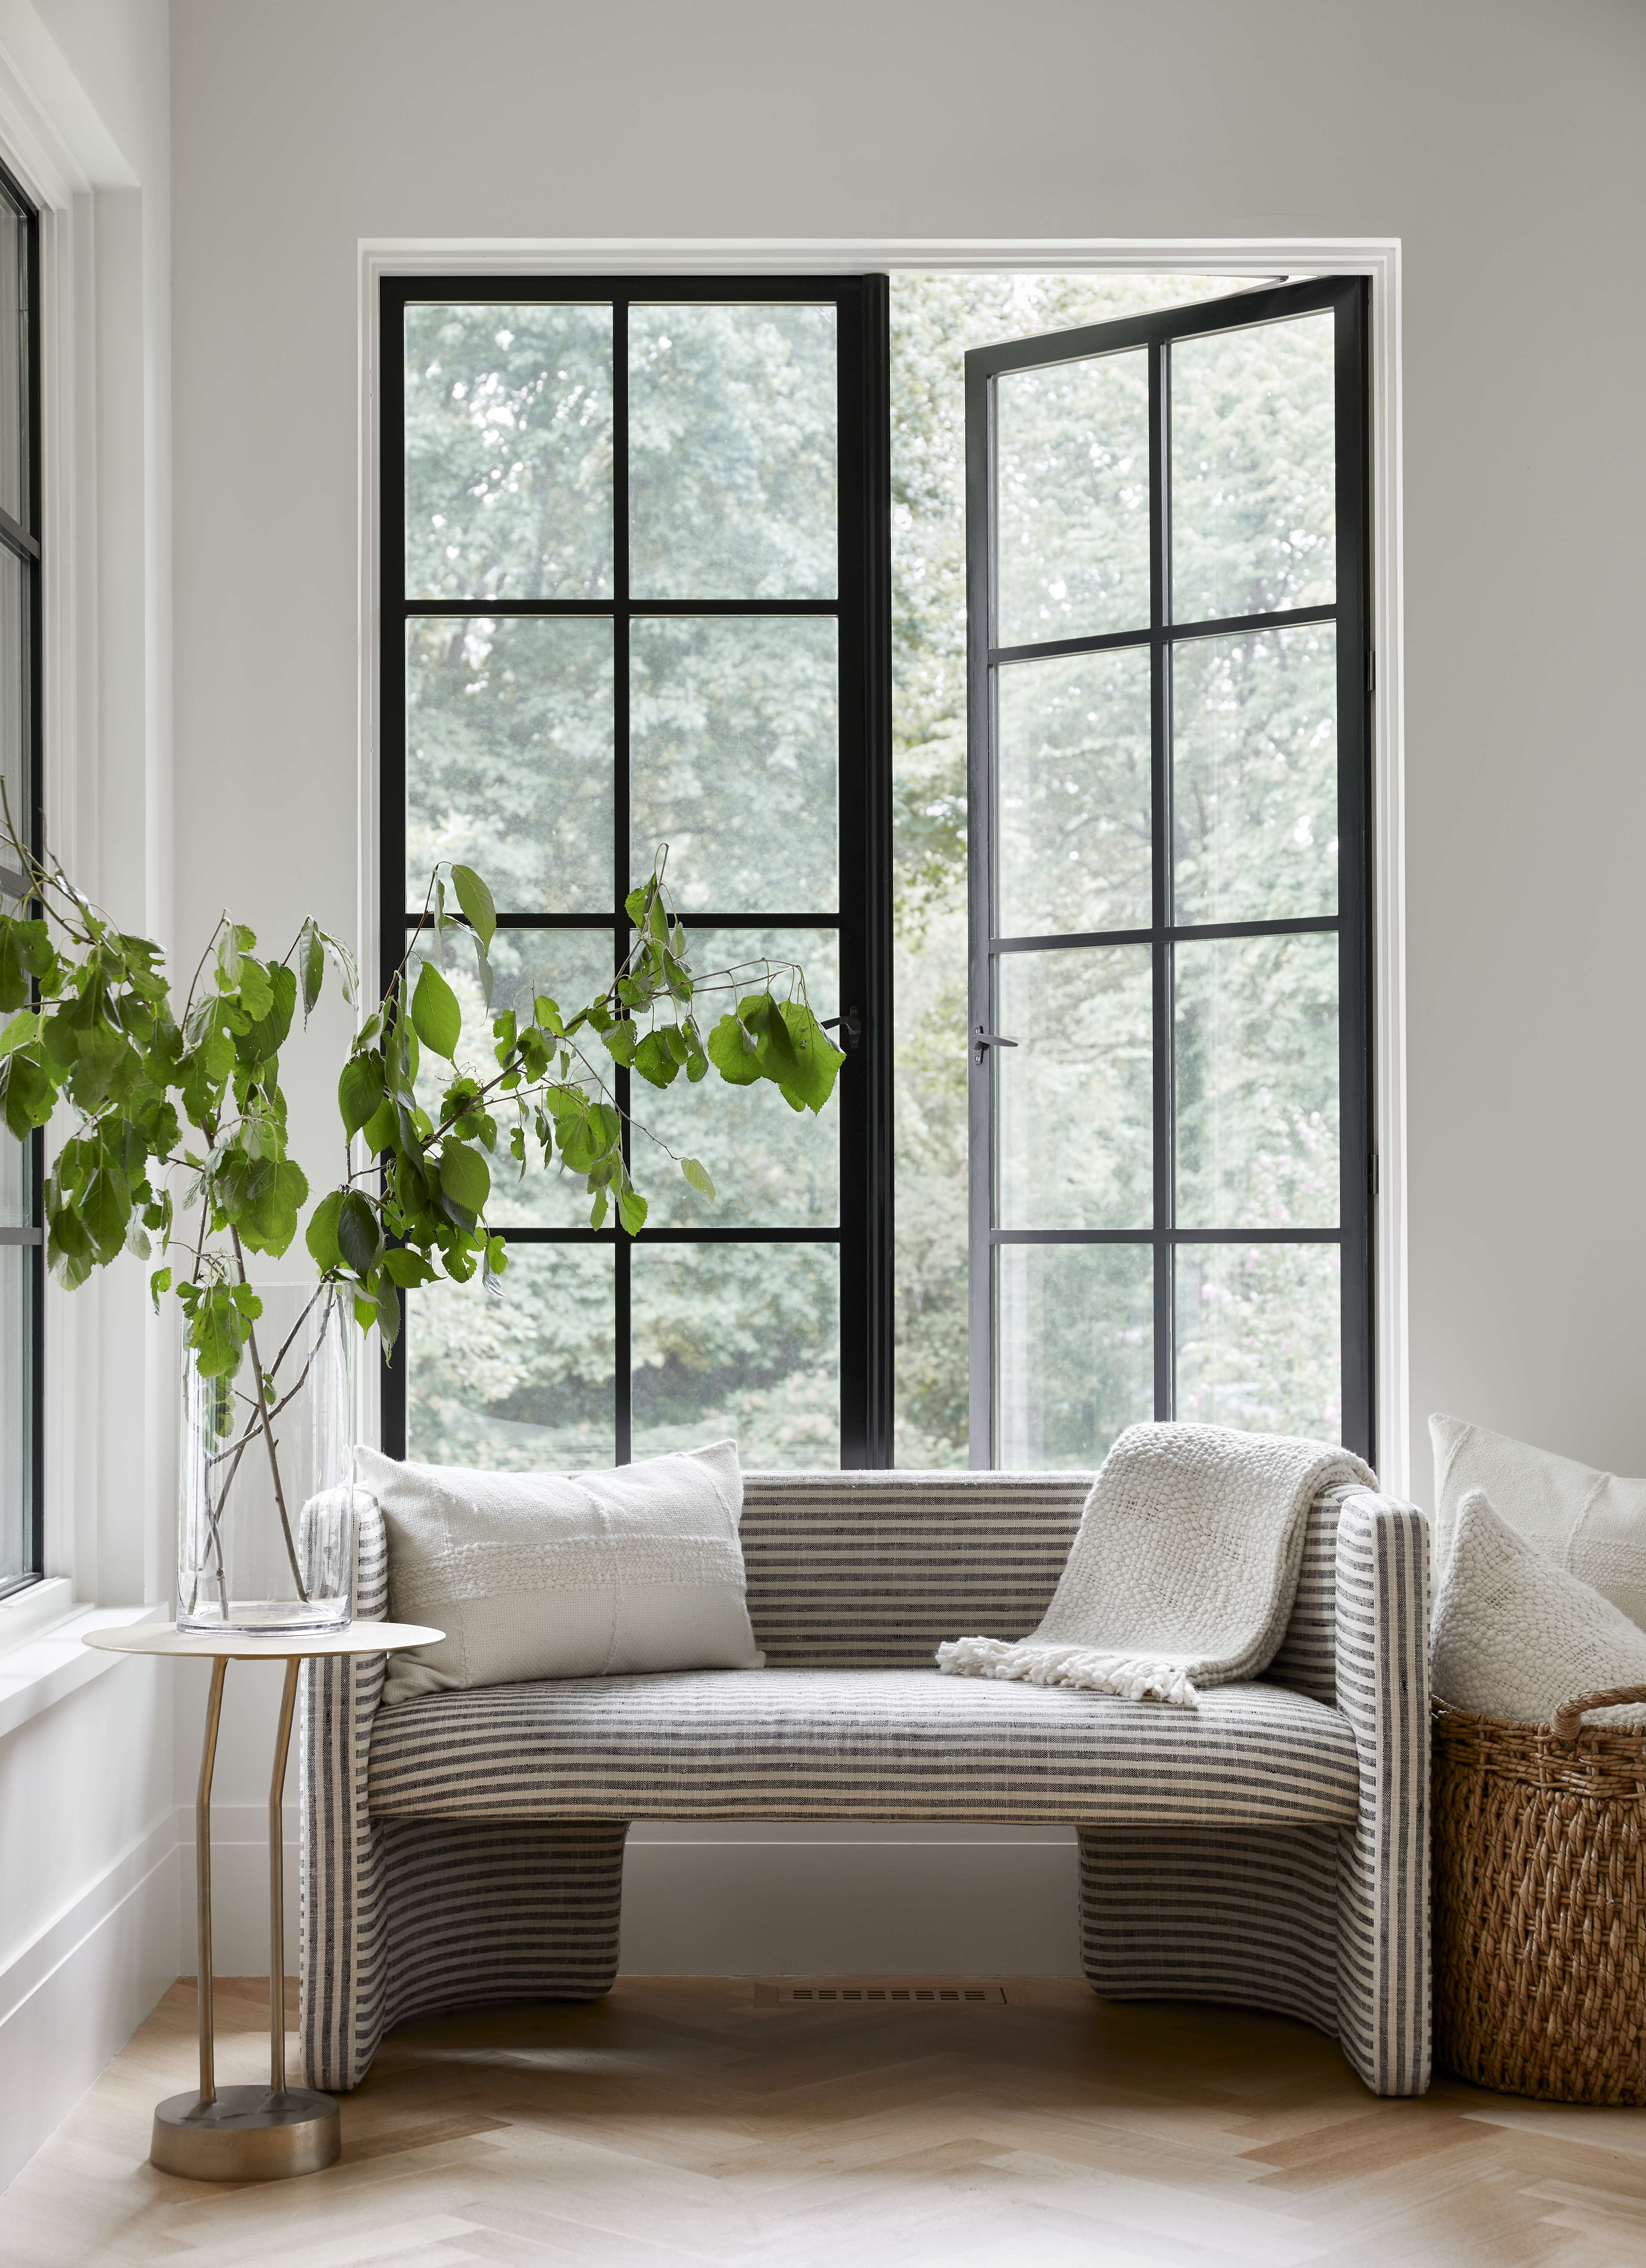 The interplay of curves and straight lines, textures rough and smooth, transform this corner into an inviting reading nook. Find similar woven baskets here. 
